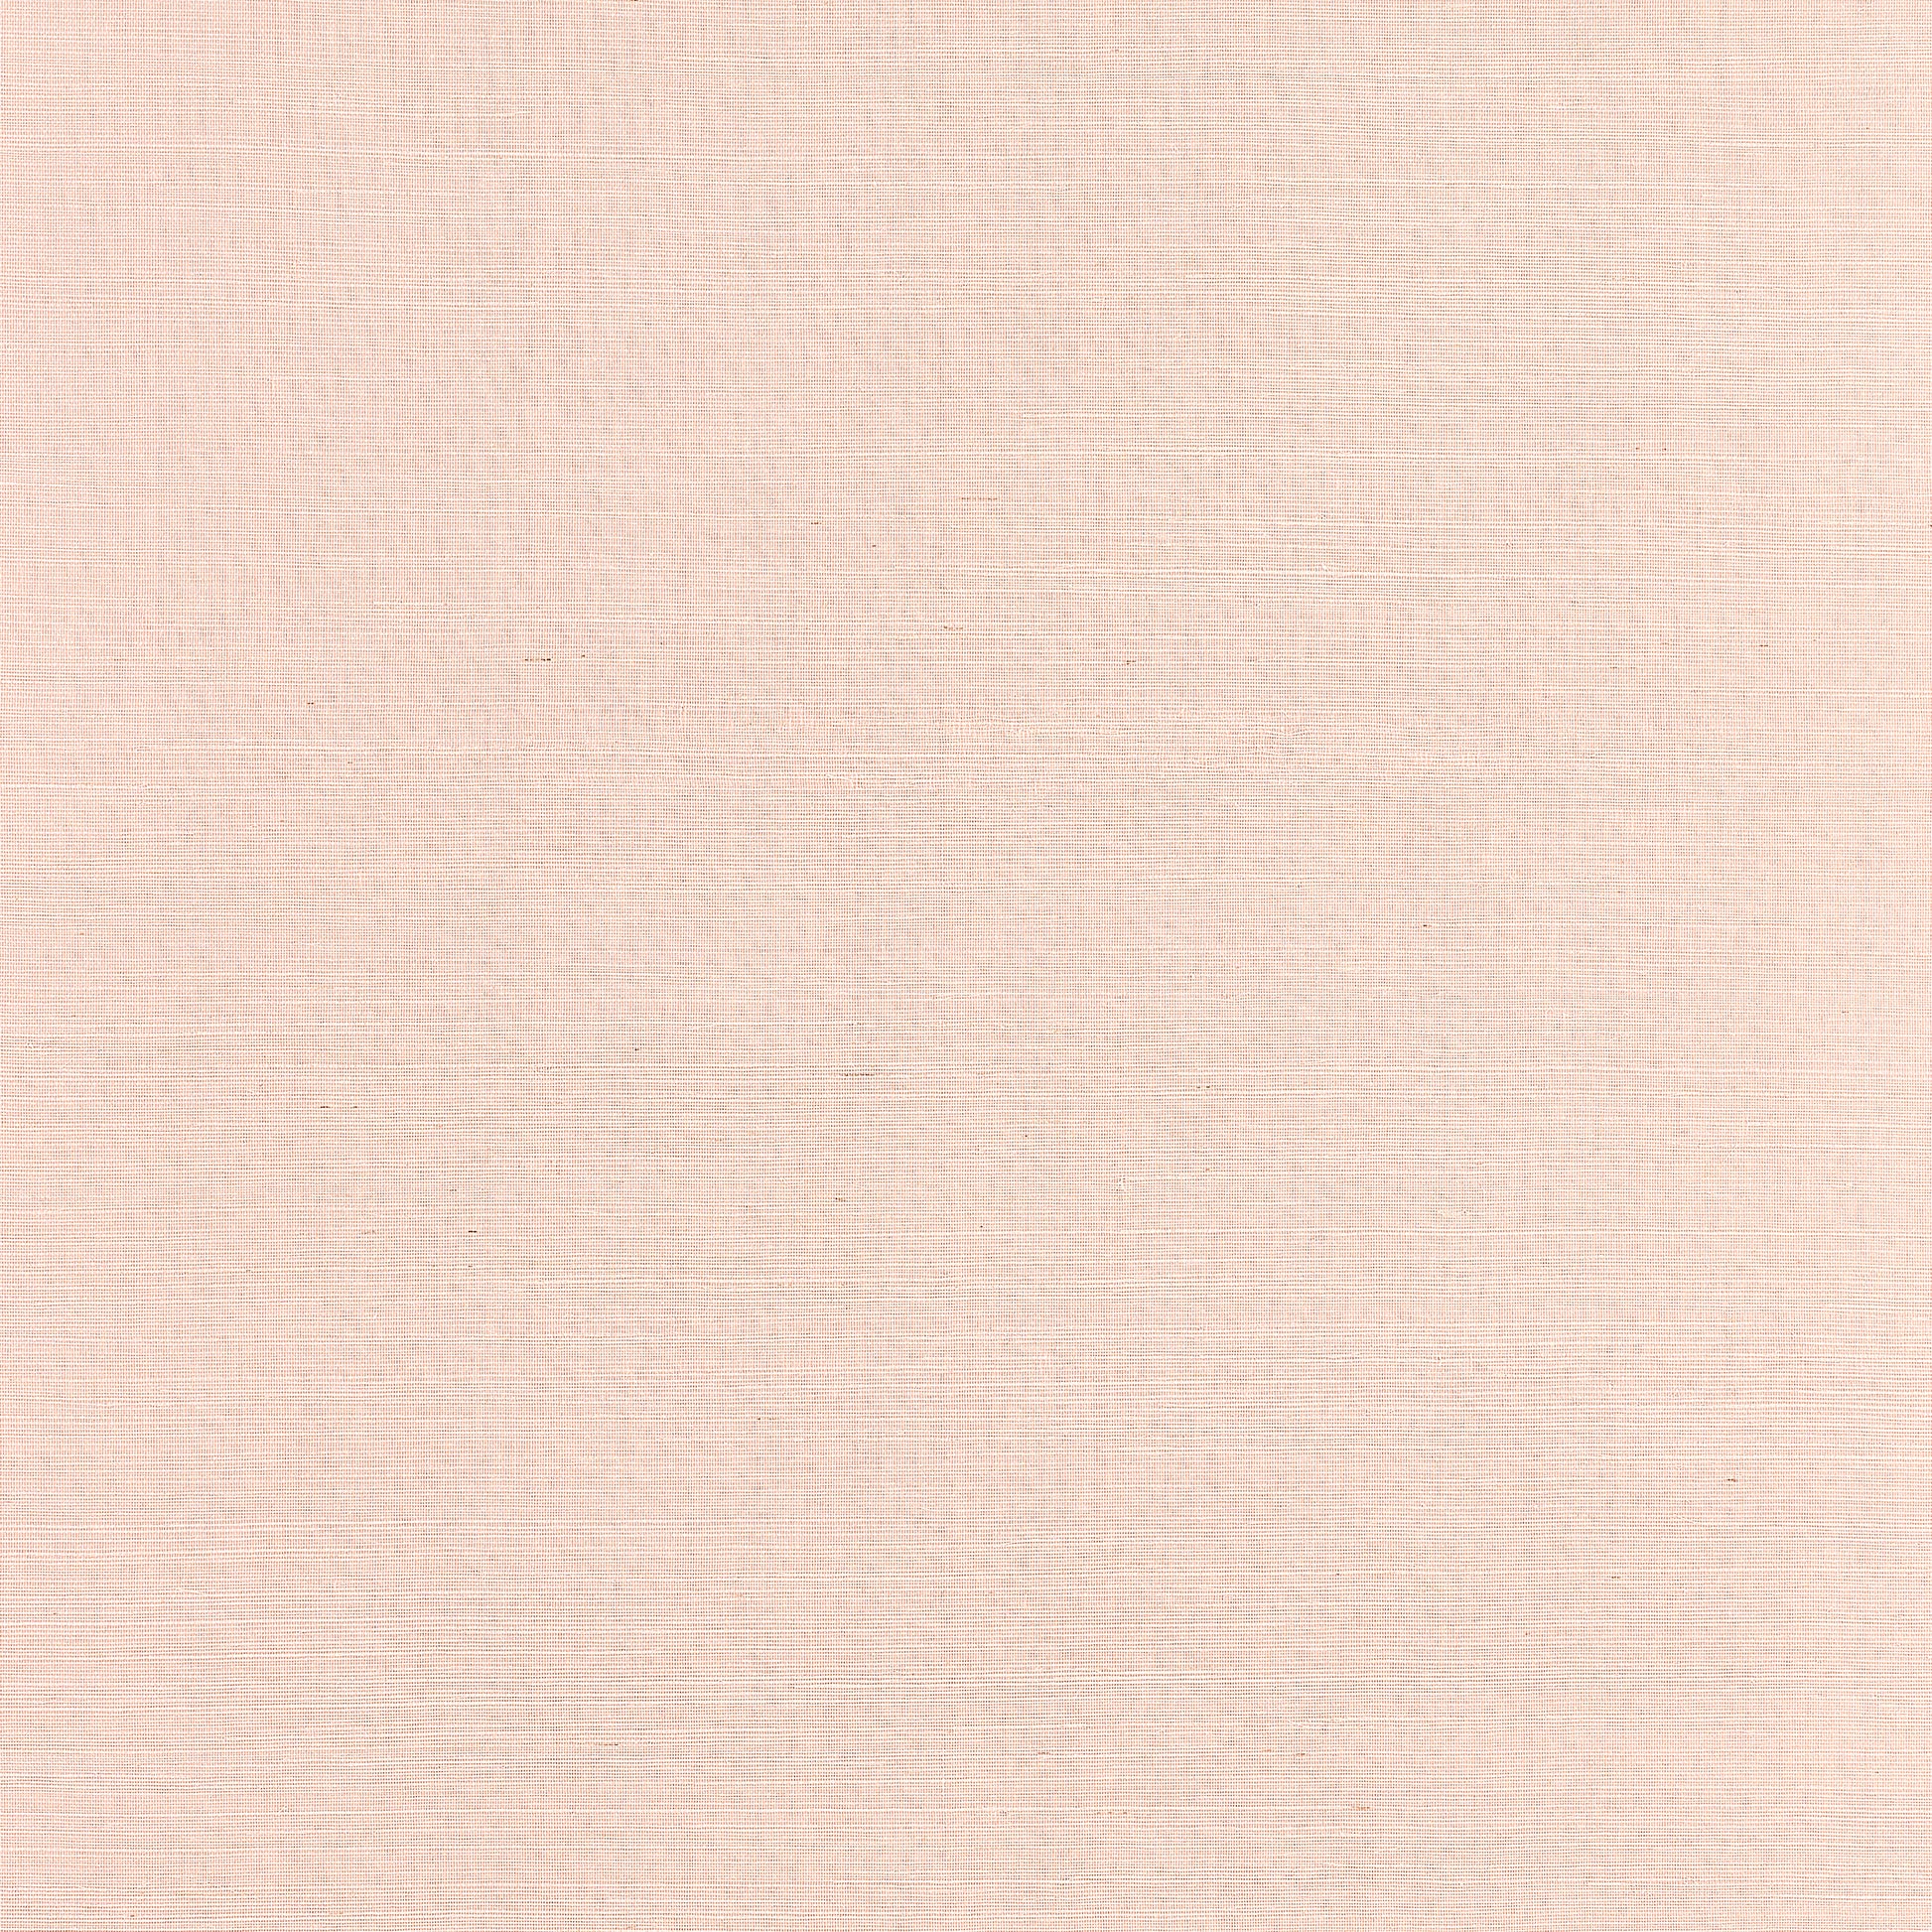 Purchase Thibaut Wallpaper Product# T19648 pattern name Heather Sisal color Blush. 